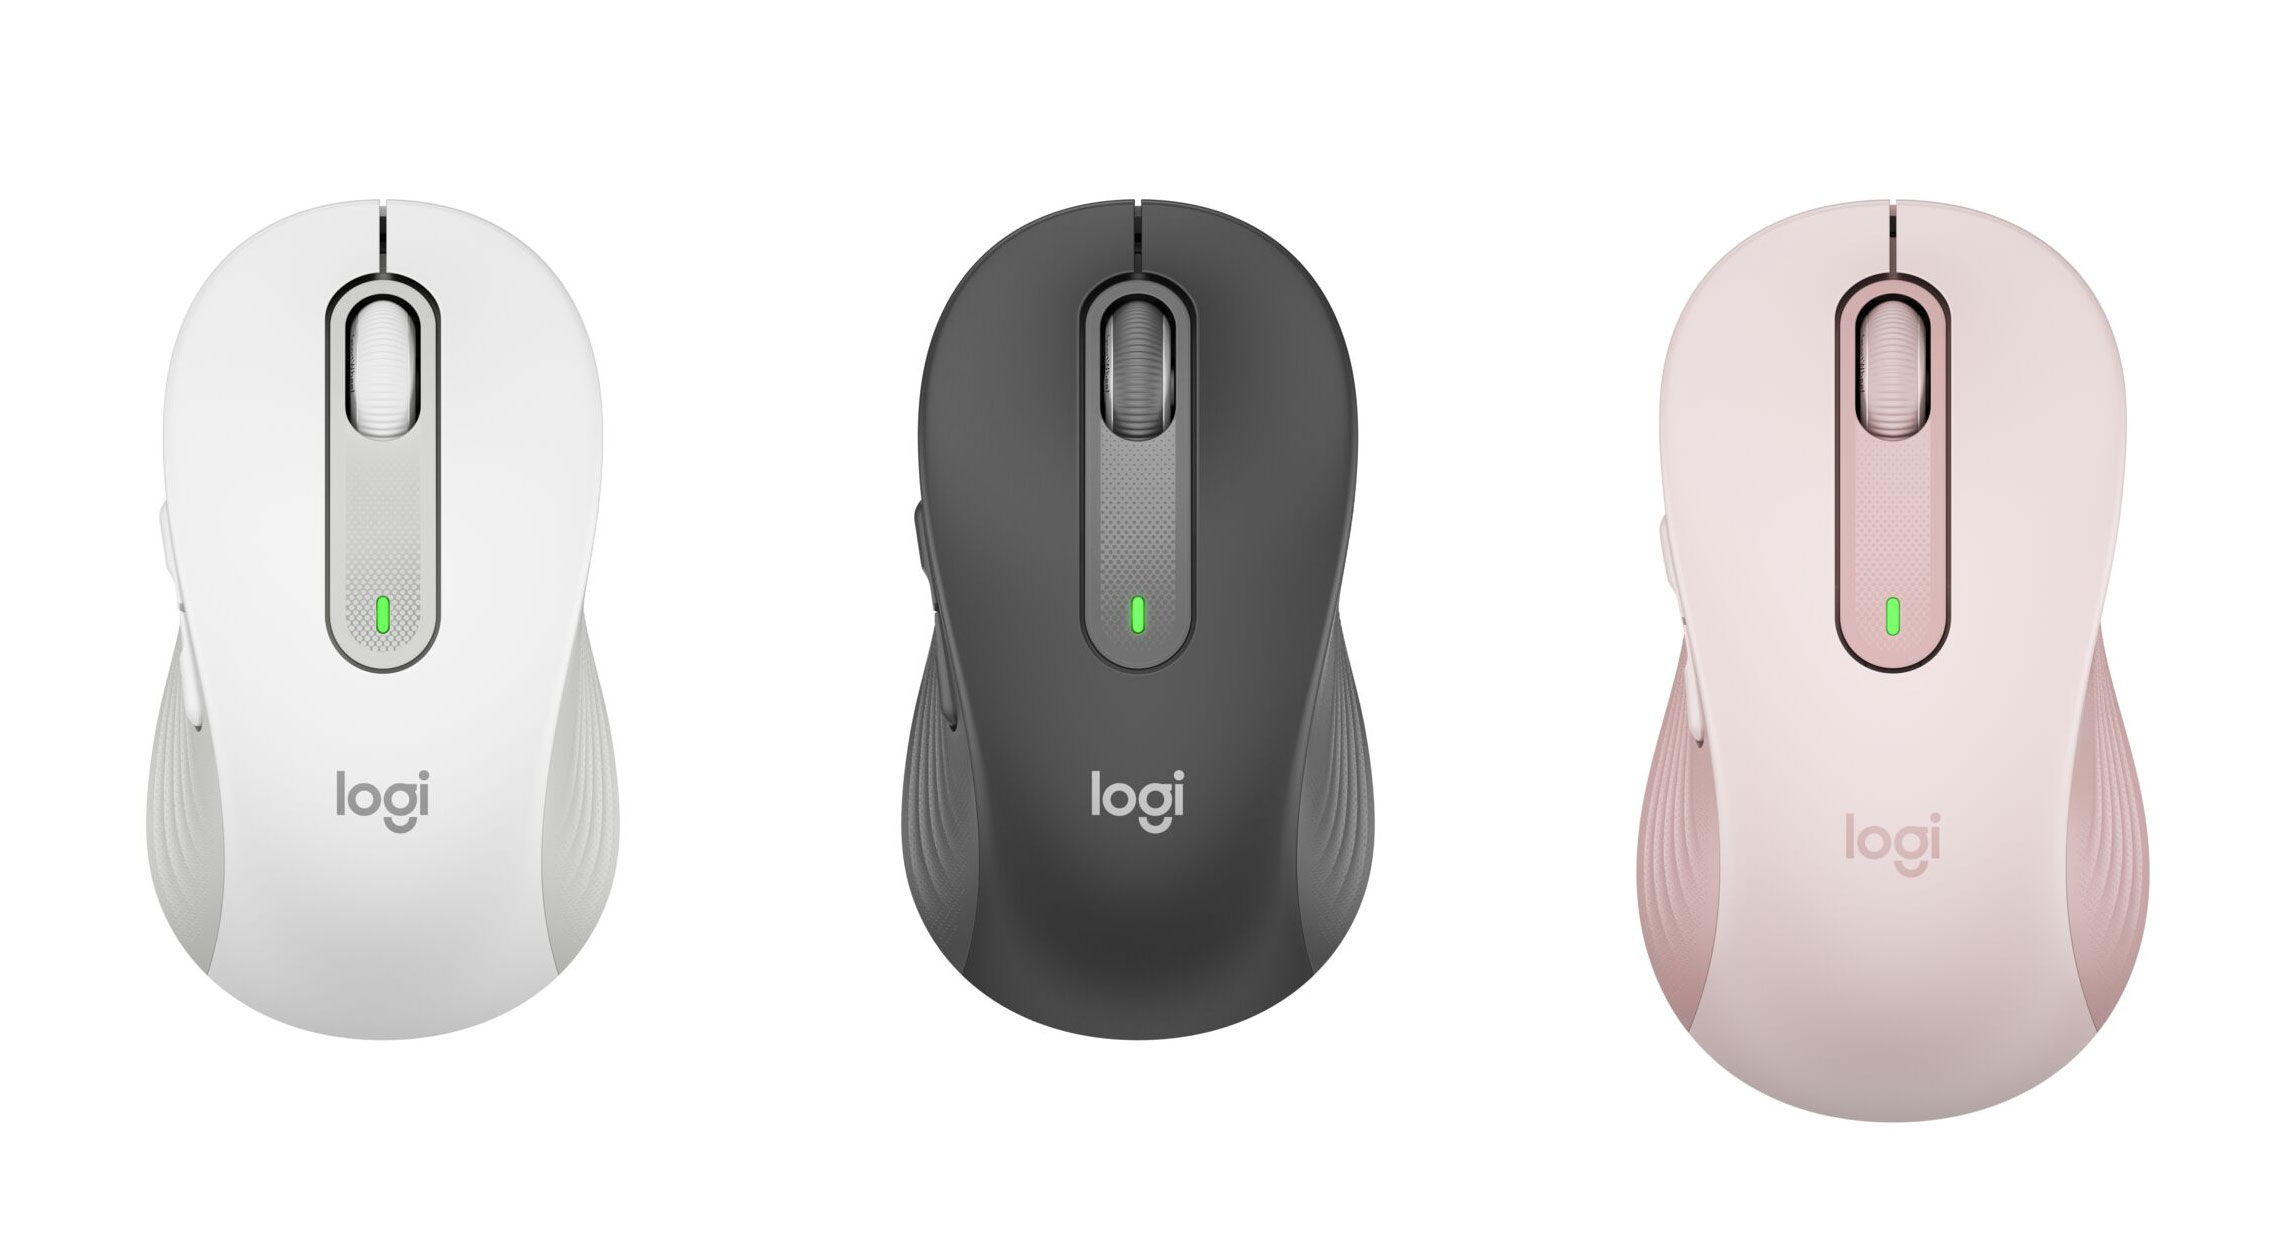 Logitech Signature M650 Mouse Offers a More Personalized Experience and a Left-Handed Option | Business Wire